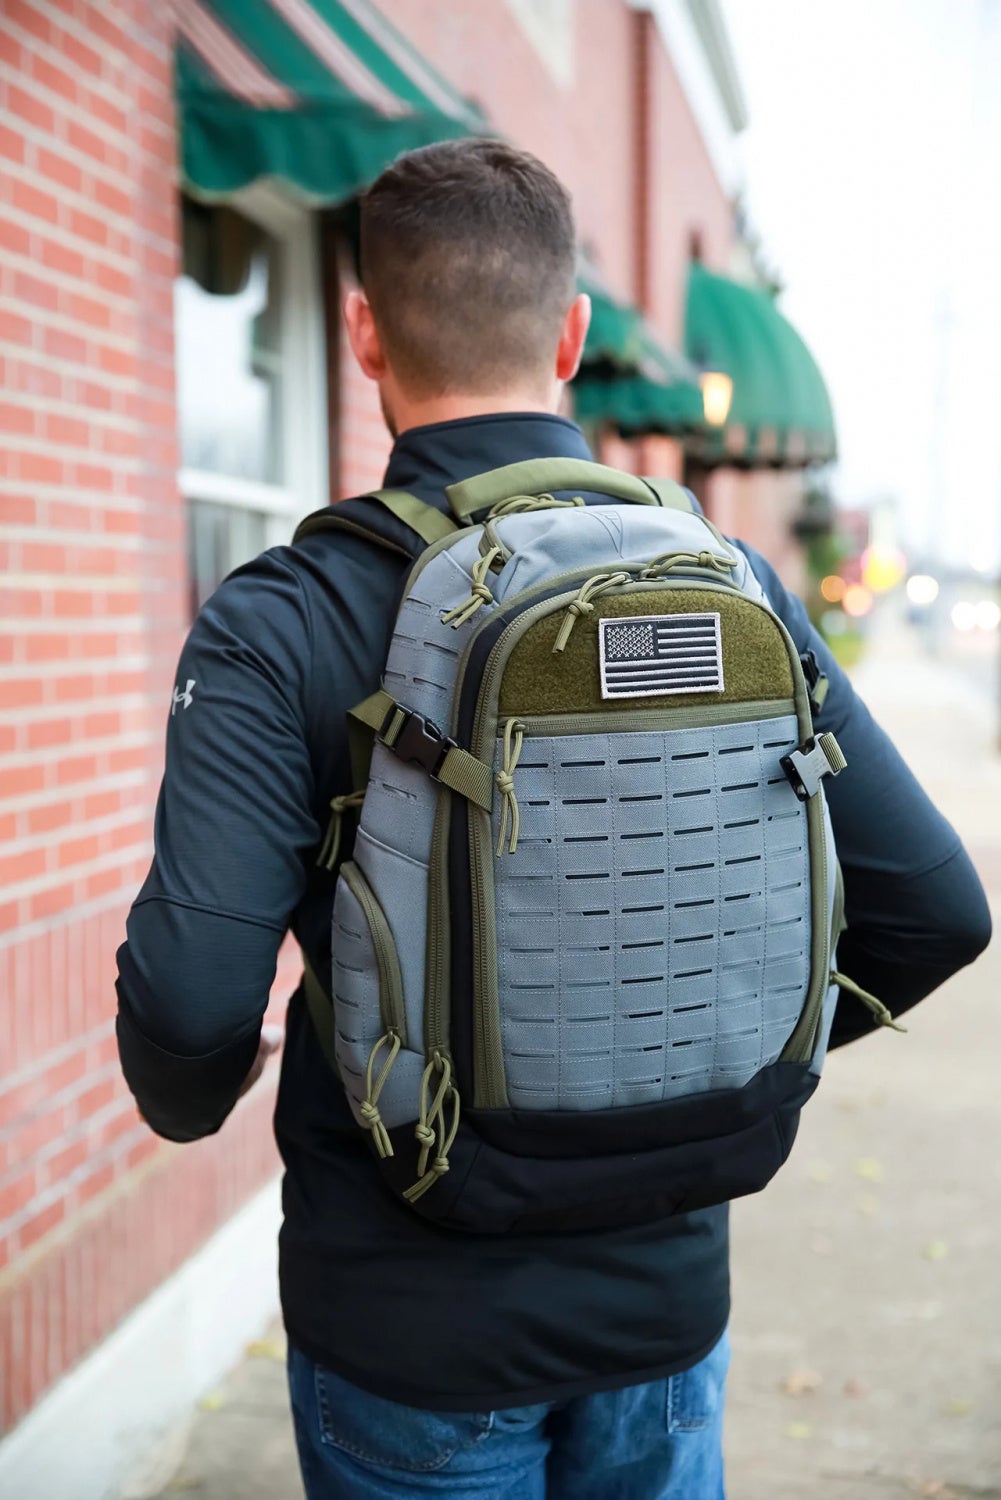 The Guardian EDC backpack is available in black, blue, tan, or multicolor "trifecta" as shown here.